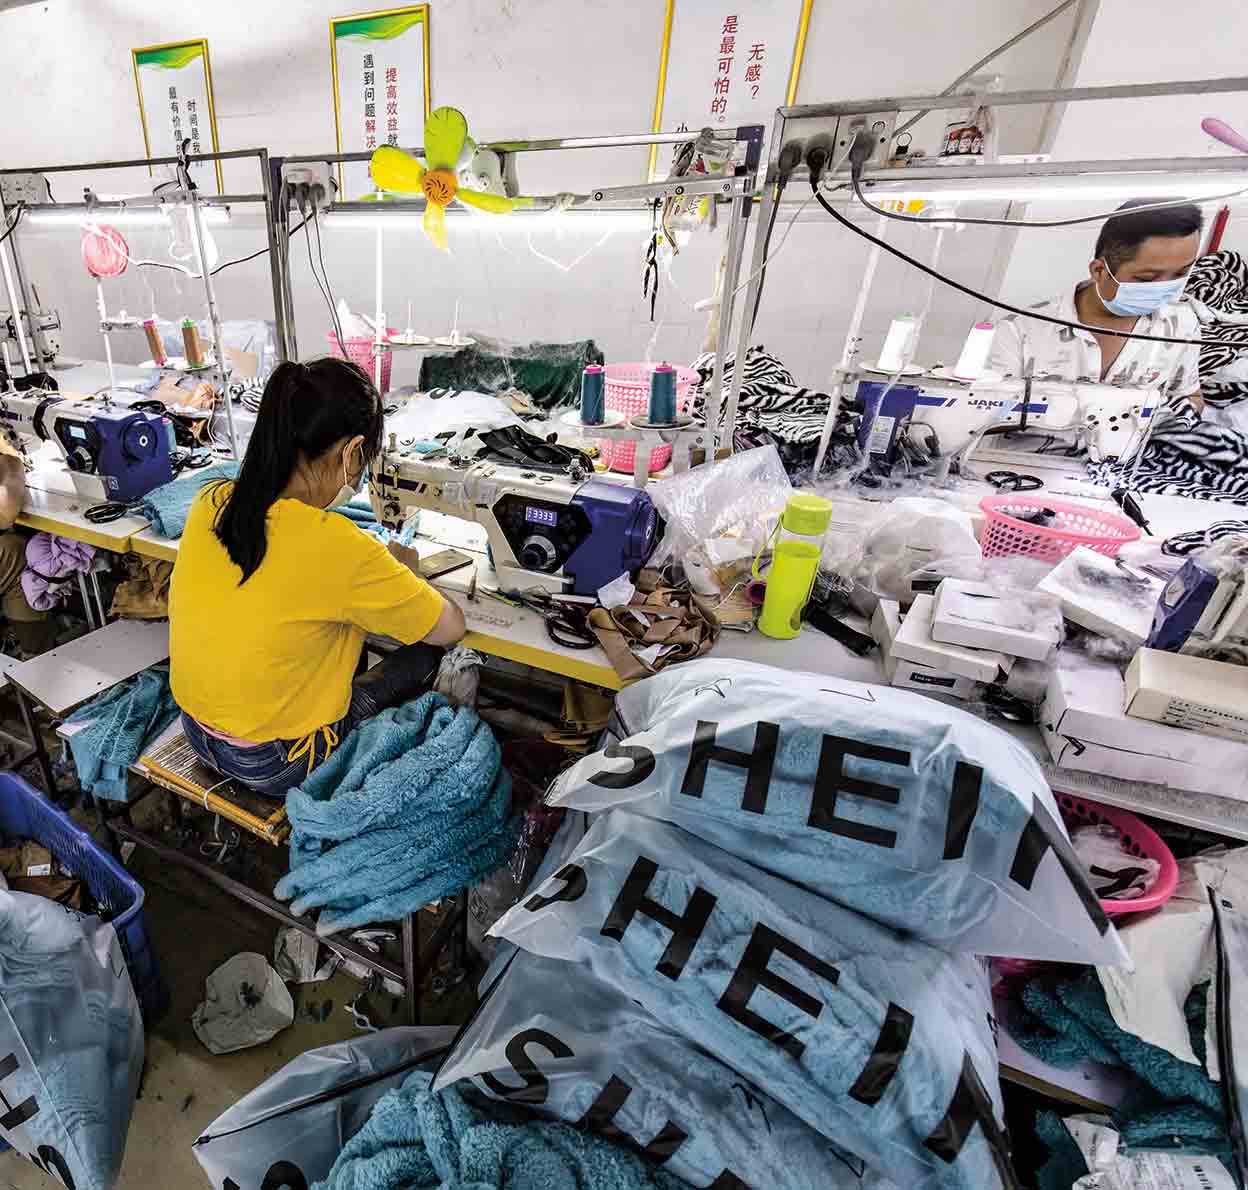 The SHEIN case: What is the true cost of fast fashion?